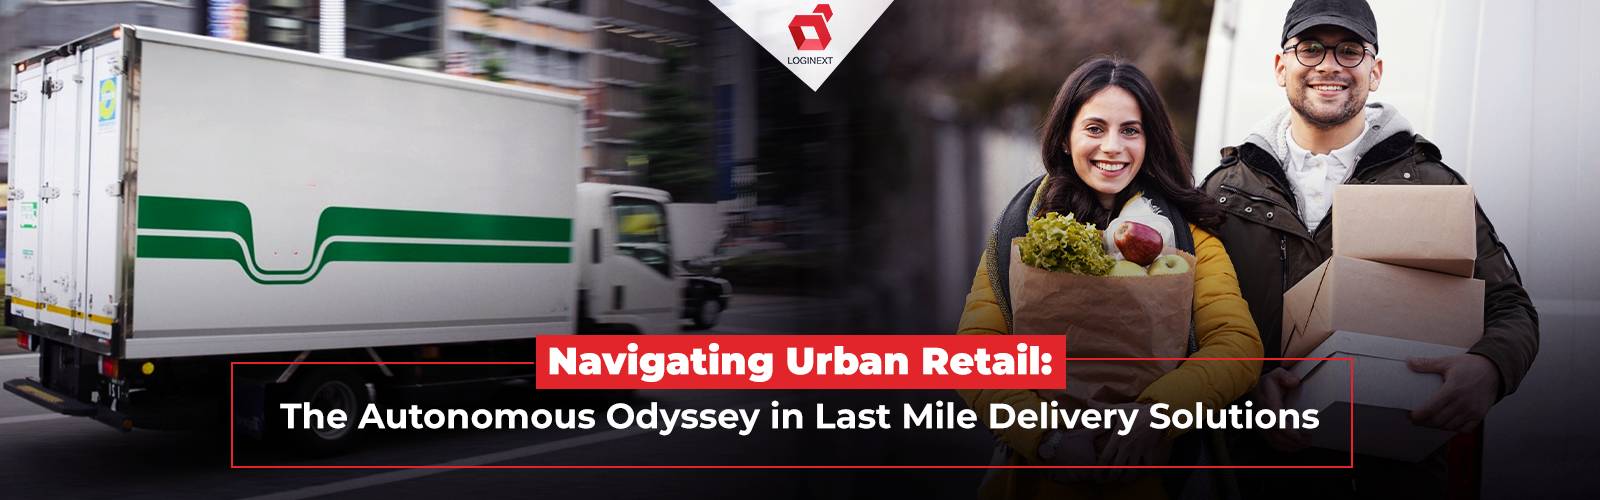 How to navigate urban retail problems using last mile delivery solutions